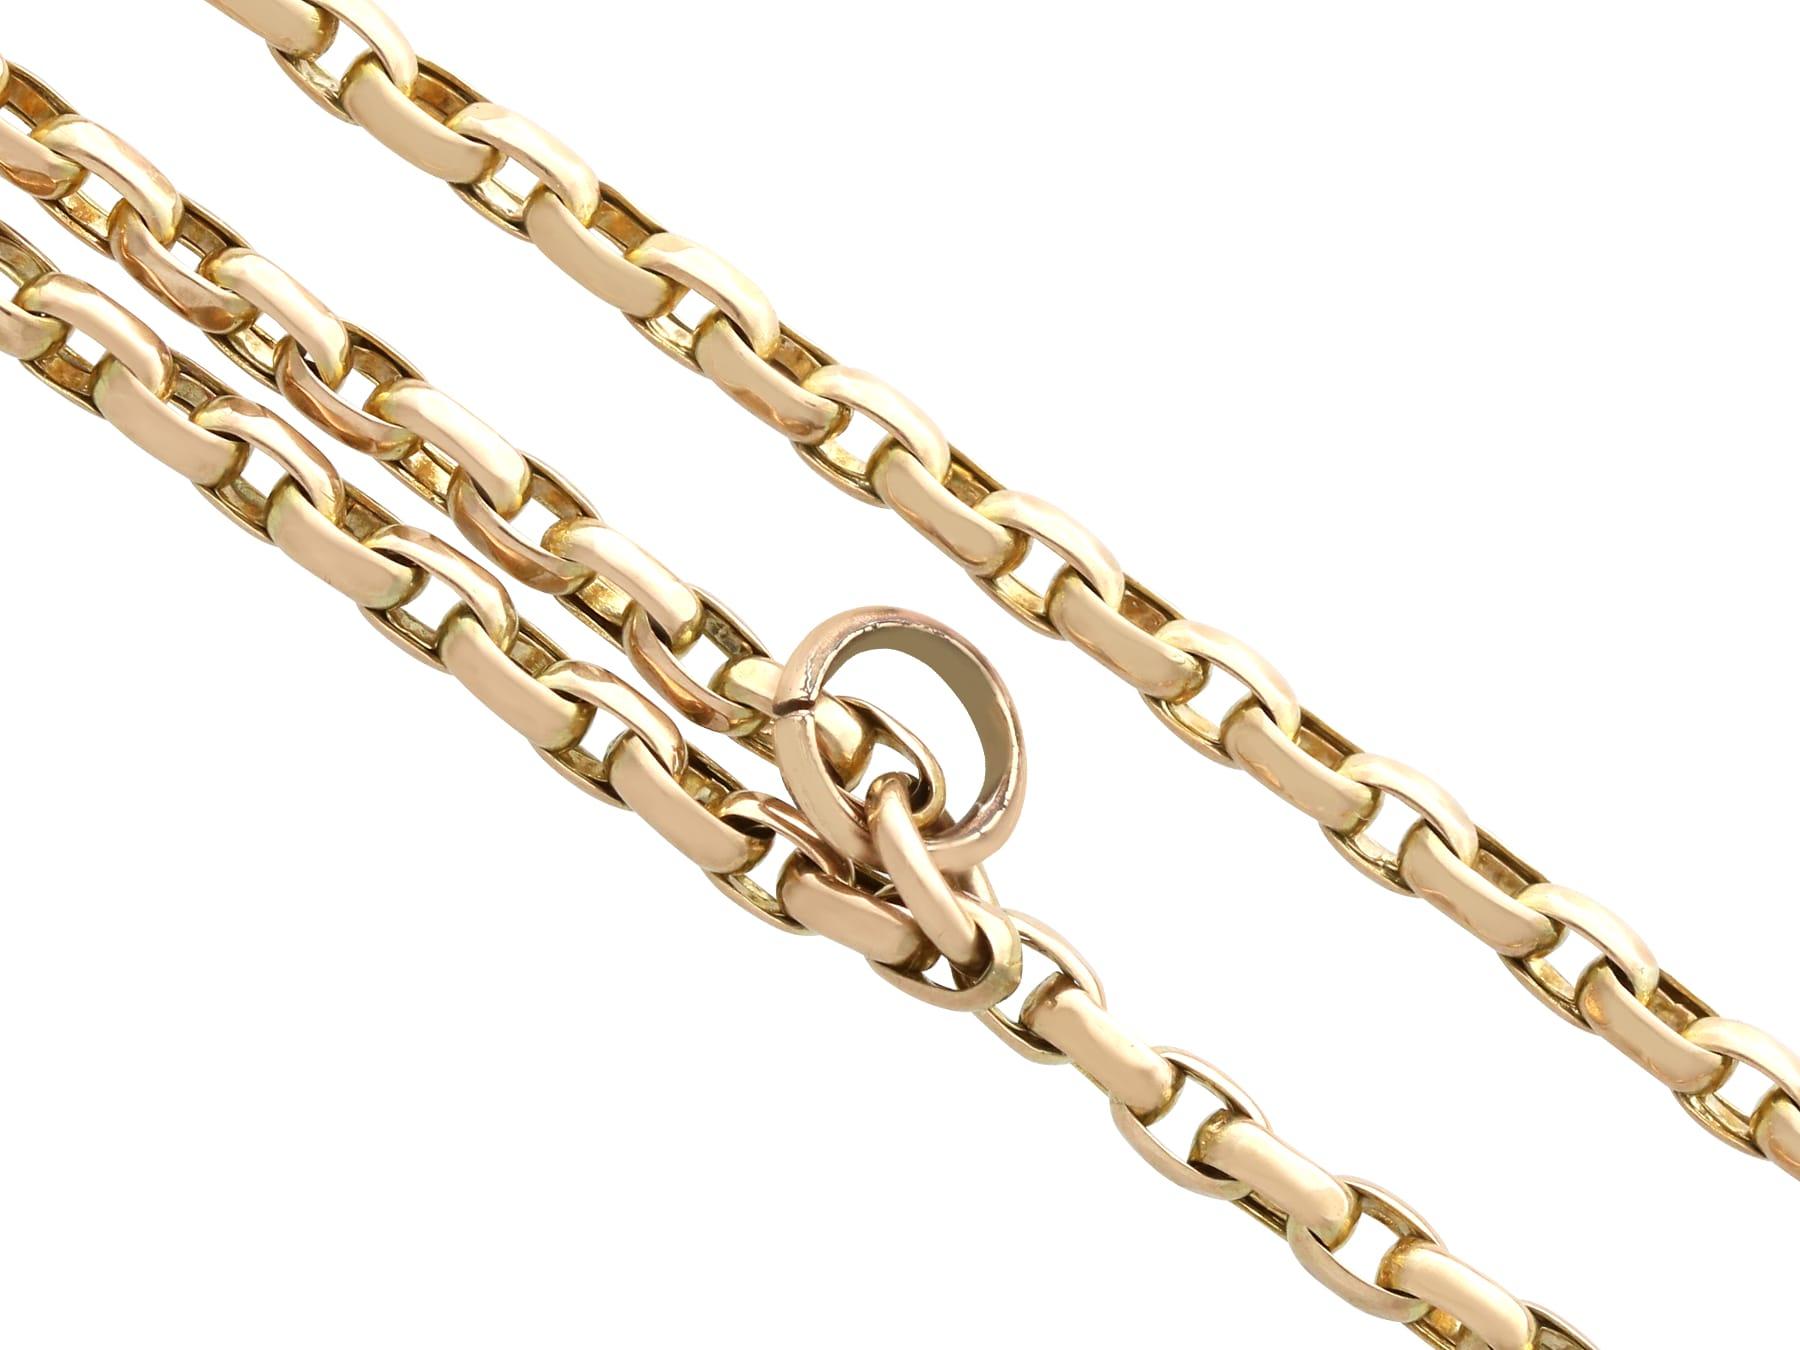 A fine and impressive antique 9 karat yellow gold longuard chain necklace; part of our diverse antique gold chains collection.

This exceptional, fine and impressive antique longuard chain has been crafted in 9k yellow gold.

The antique longuard